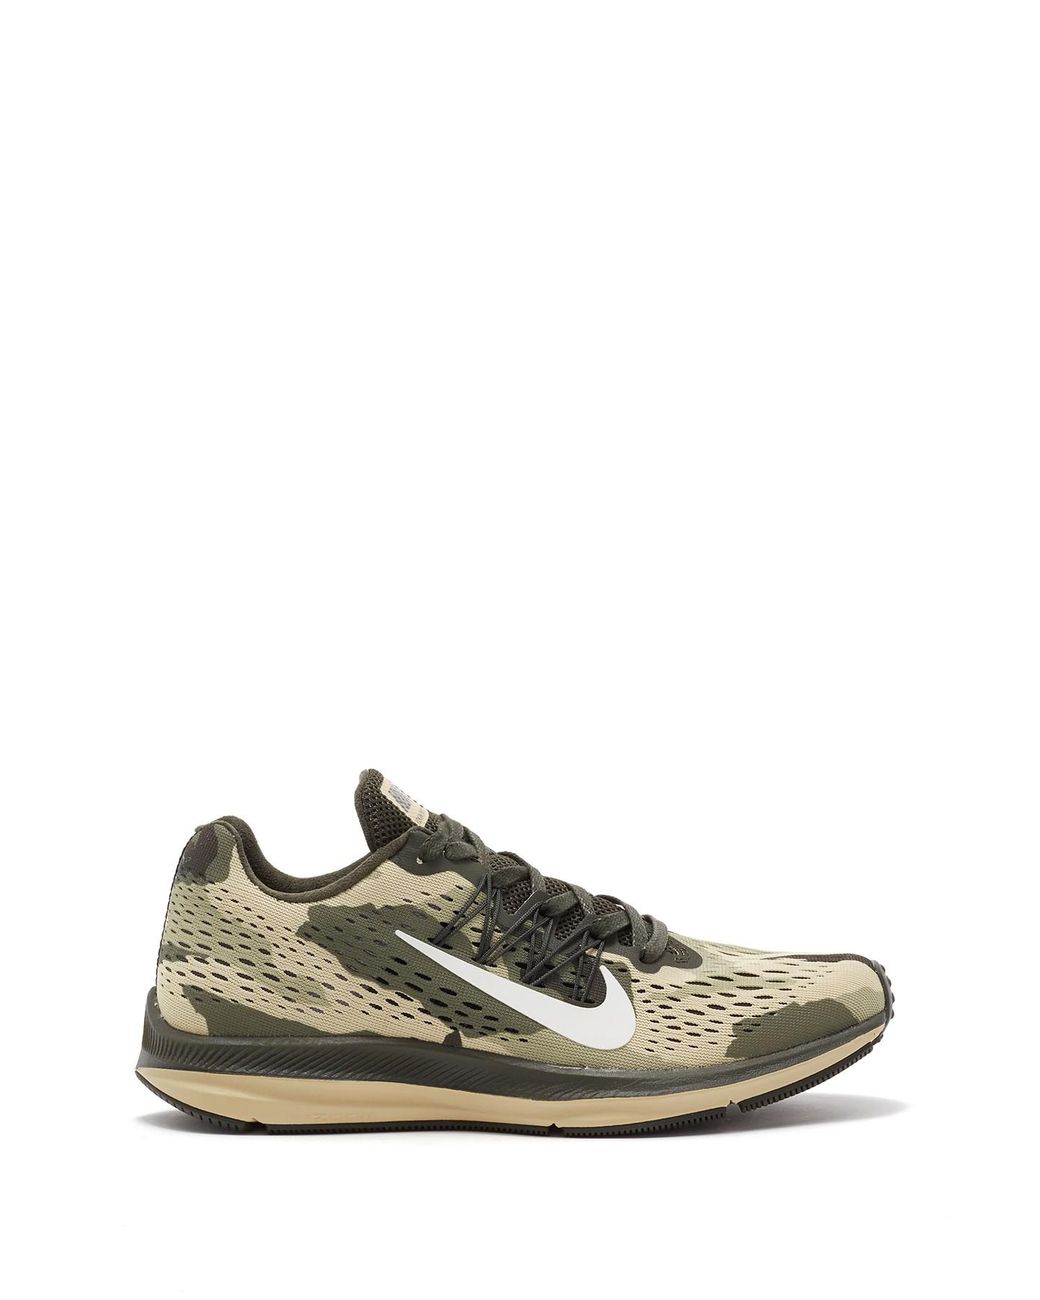 Nike Air Zoom Winflo Camo Running Shoe in Green for Lyst